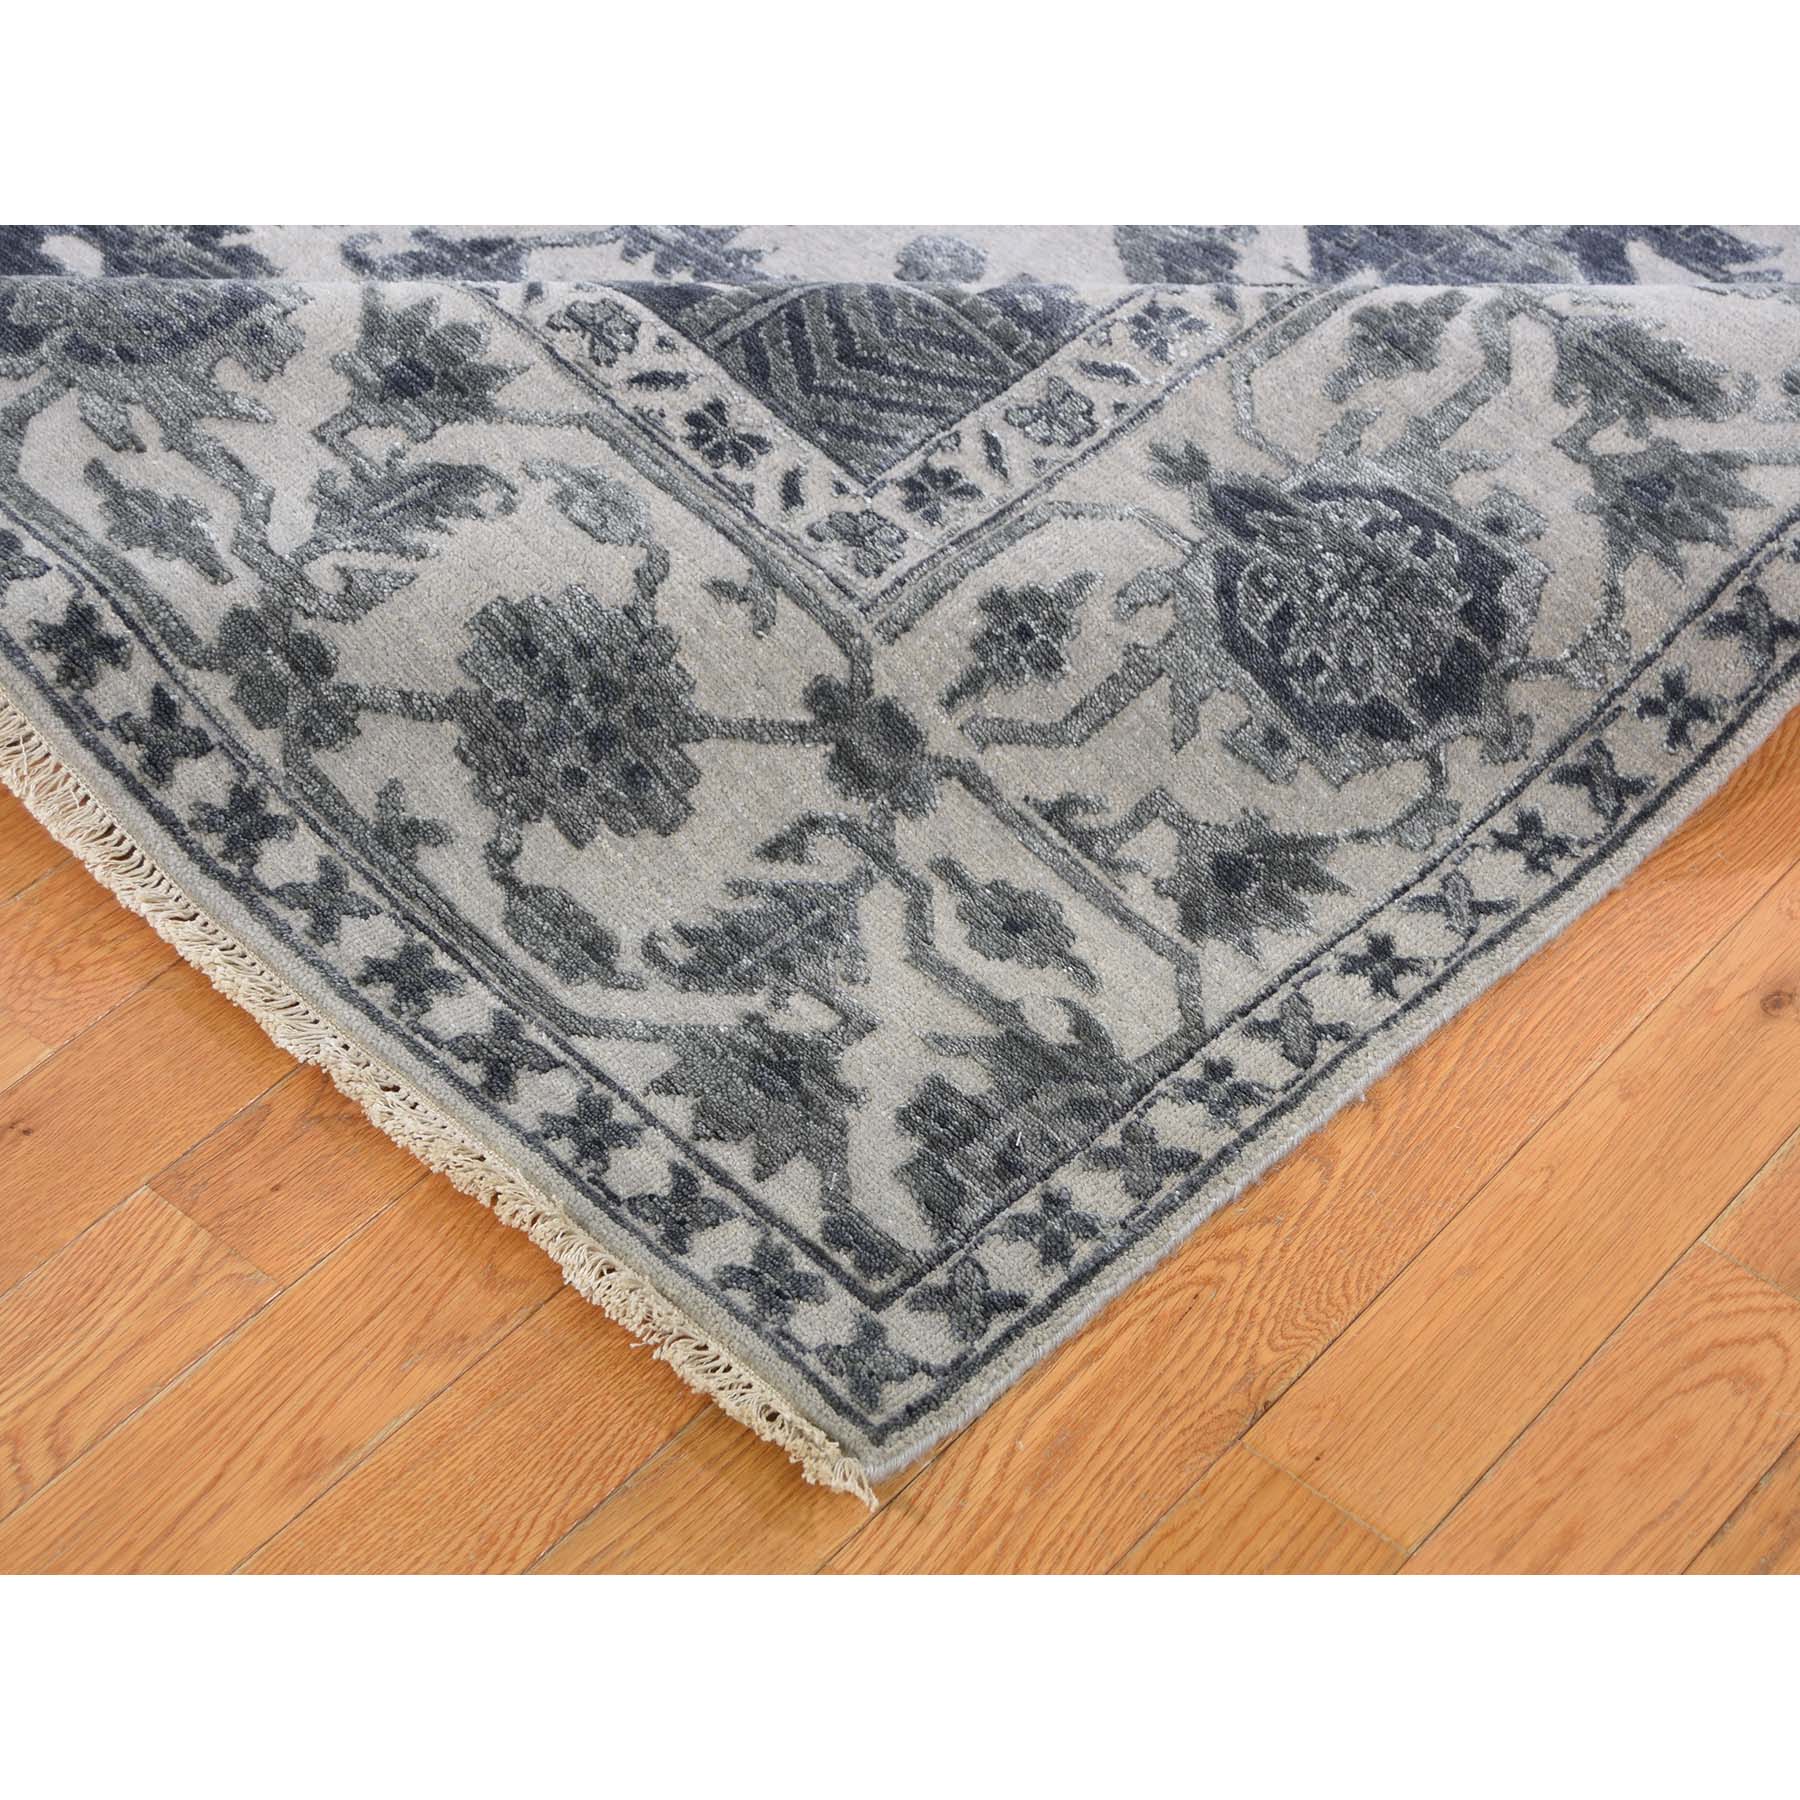 9-x12-1  Silver Heriz Design Wool And Silk Hi-lo Pile Hand-Knotted Oriental Rug 